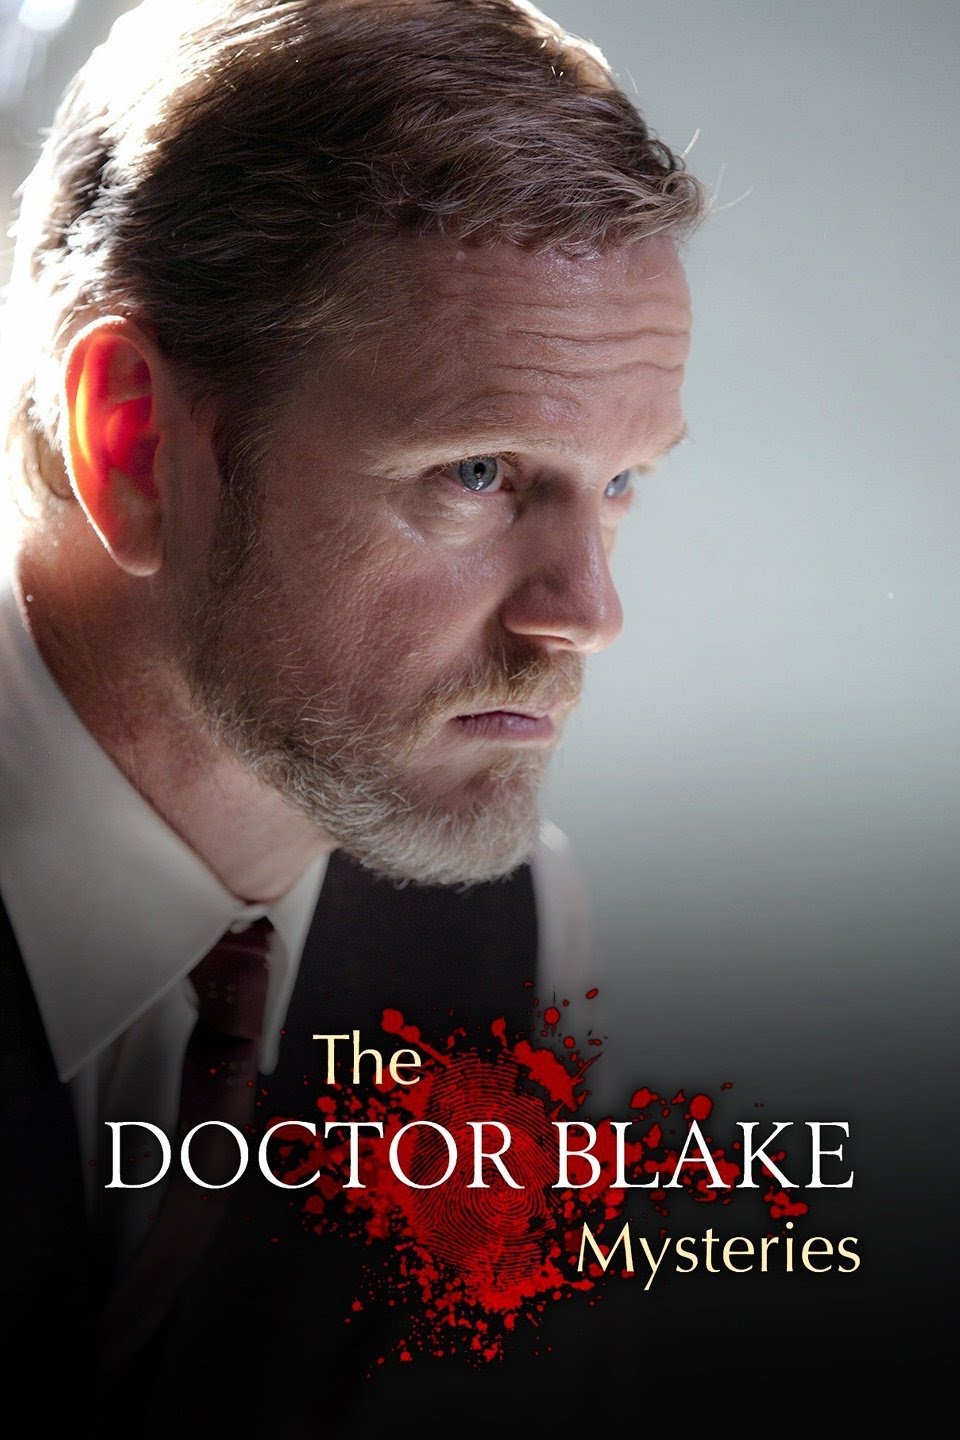 The Doctor Blake Mysteries S3 D2